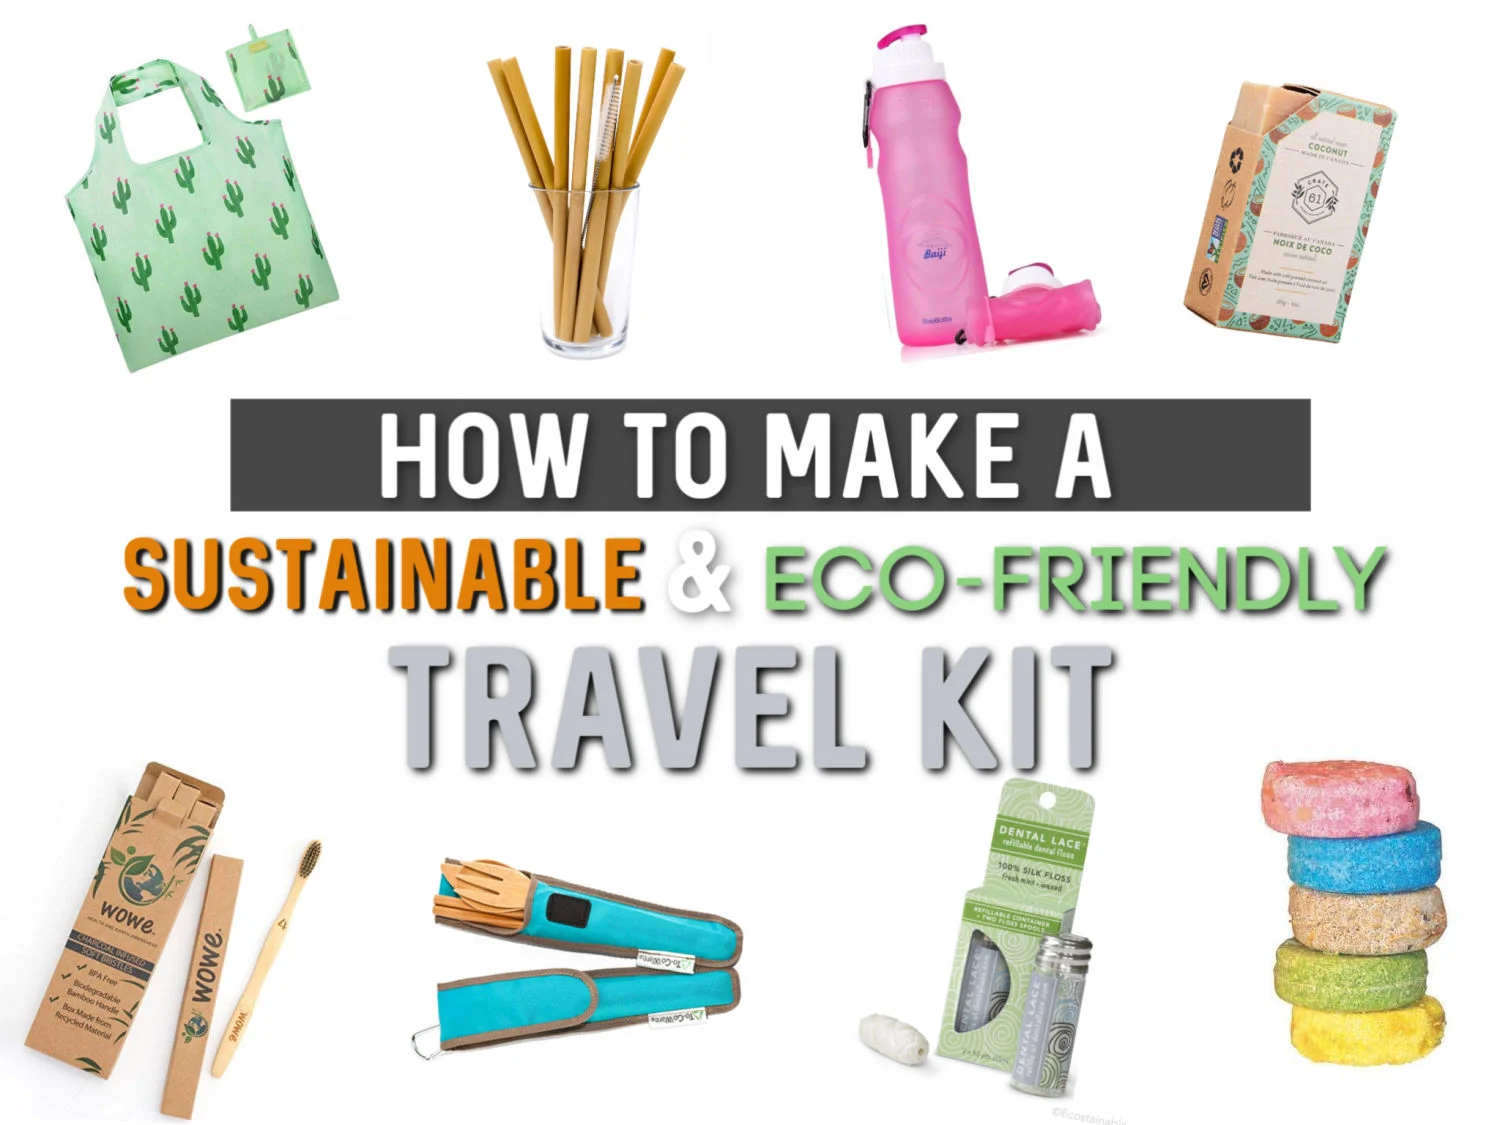 How to build your own sustainable travel kit